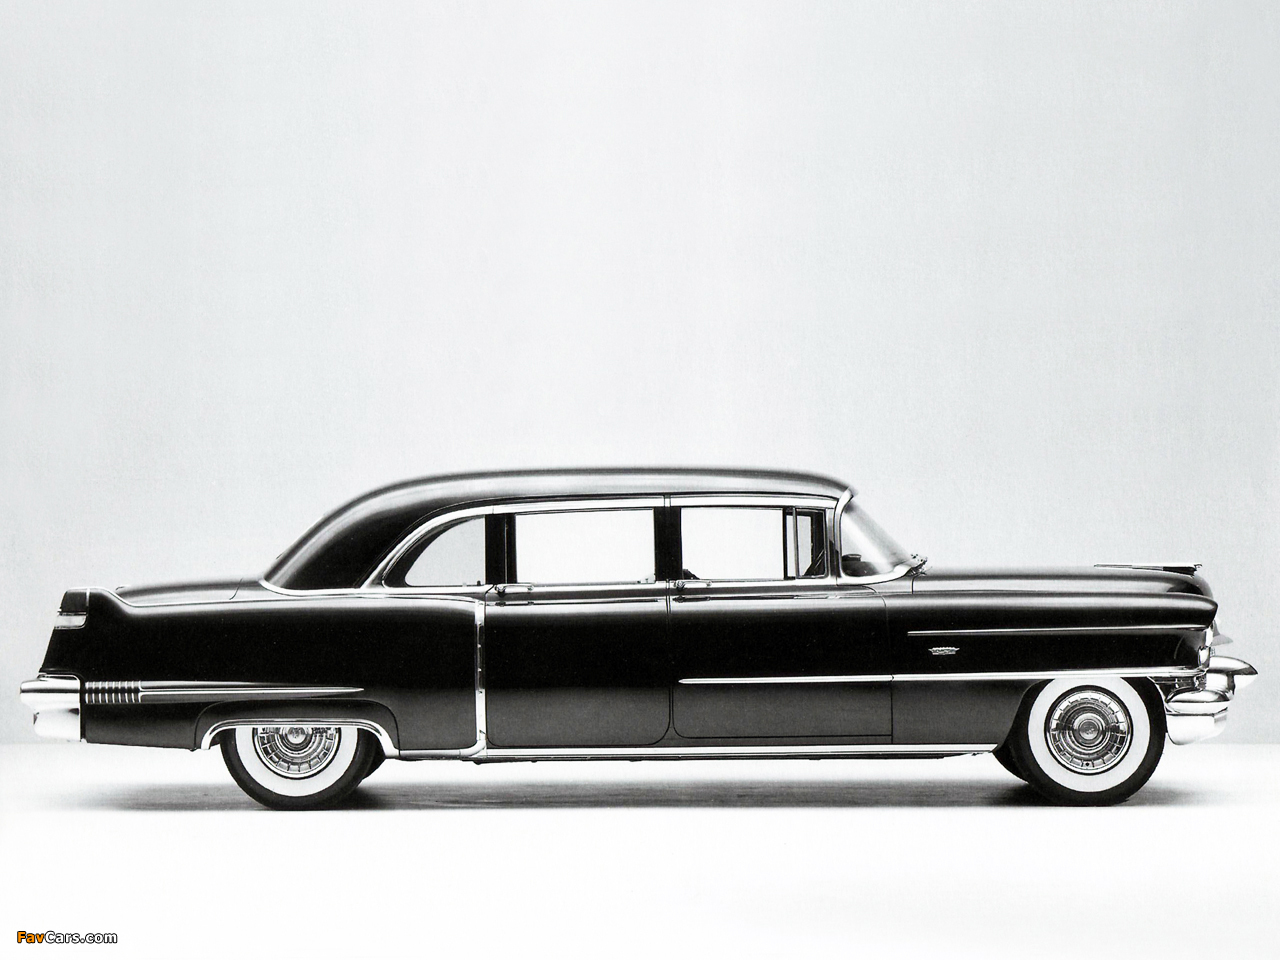 Pictures of Cadillac Fleetwood Seventy-Five Limousine 1956 (1280 x 960)